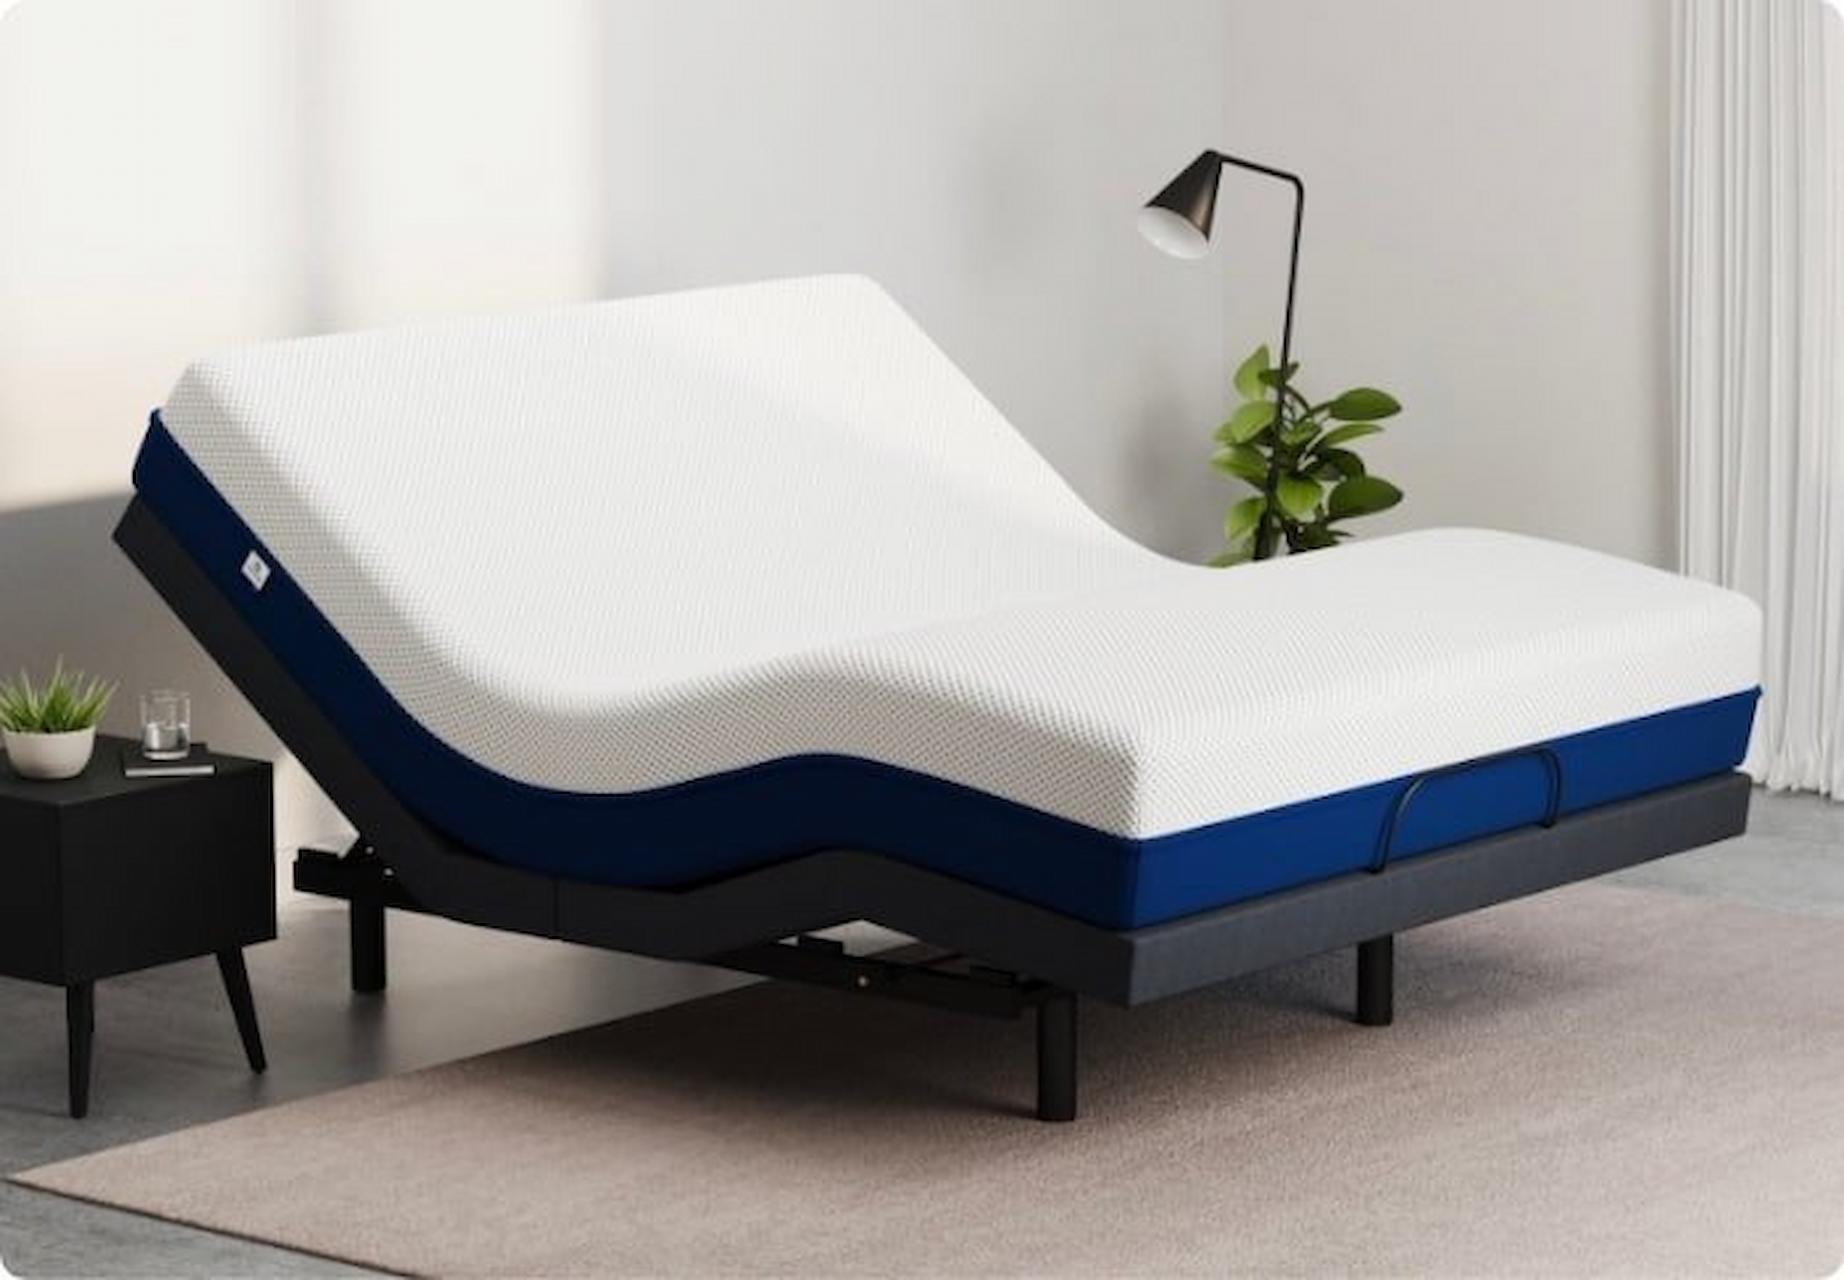 Buy Quality Beds For Better Sleep In Melbourne